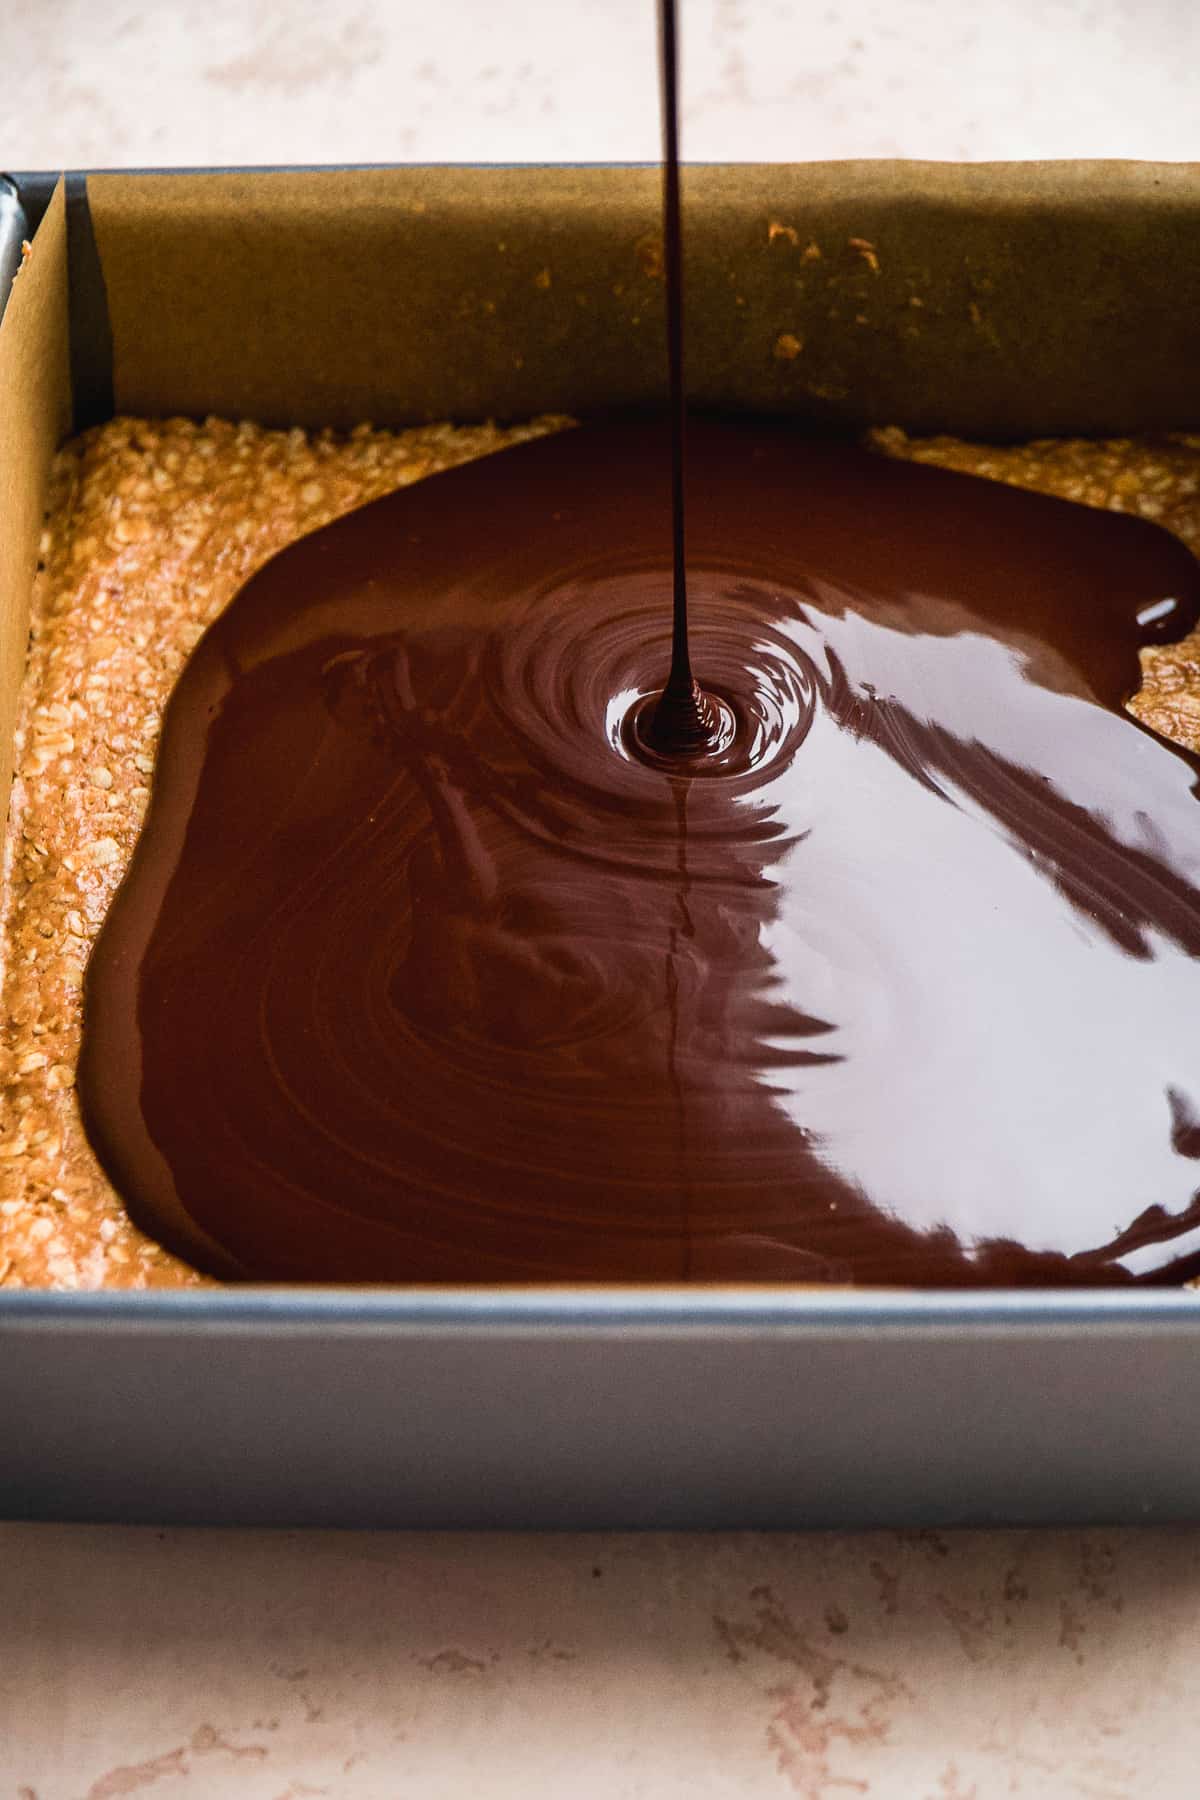 Chocolate being poured over a layer of peanut butter oats.